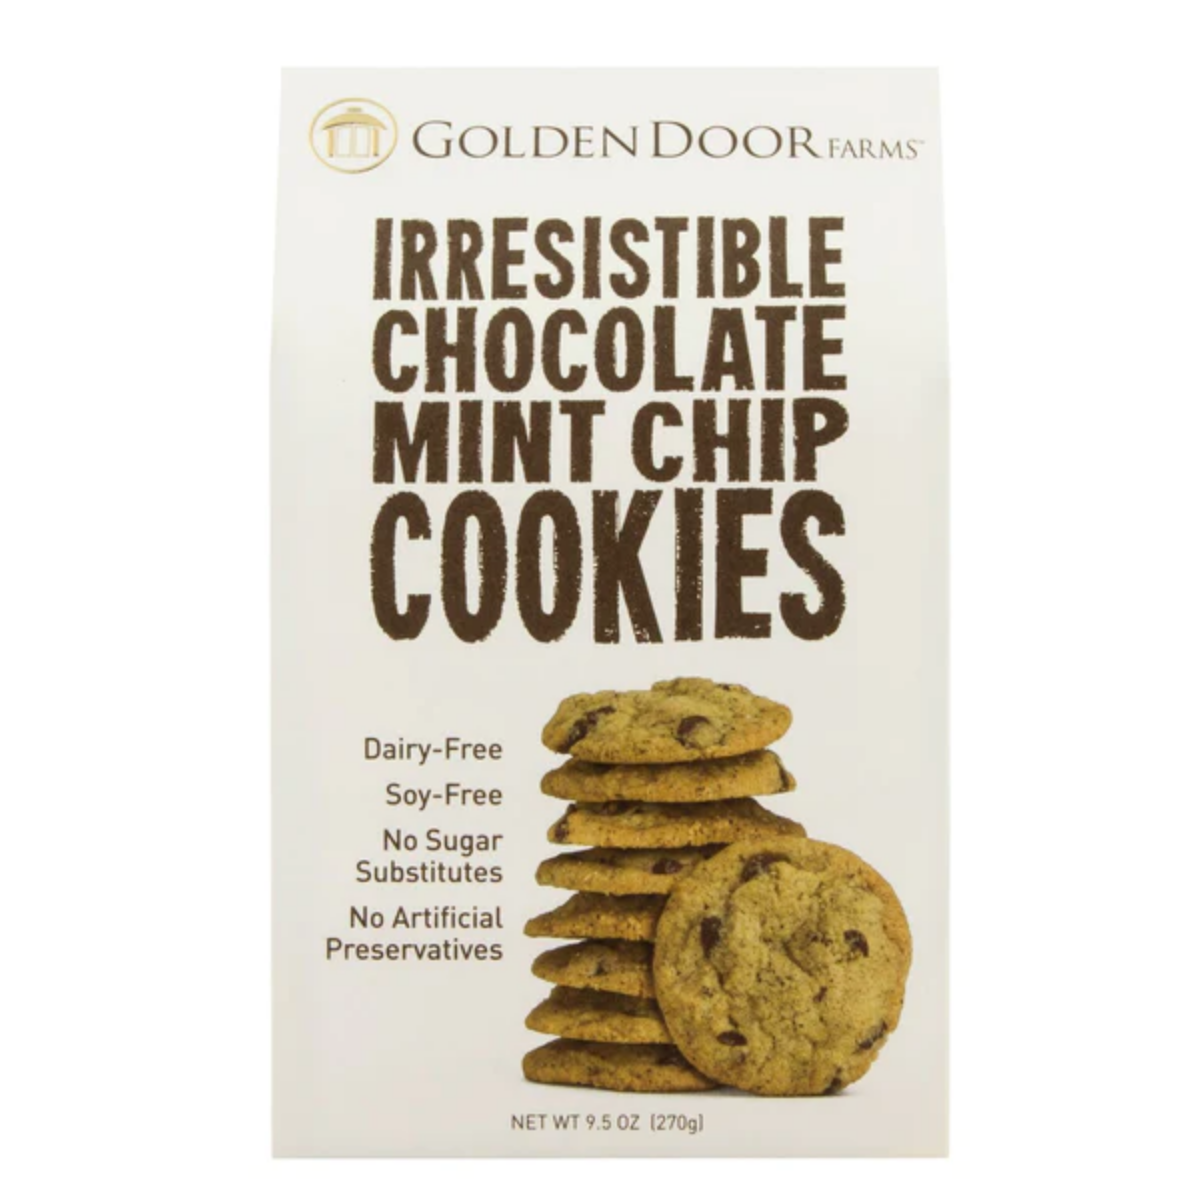 Irresistible Chocolate Mint Chip Cookies